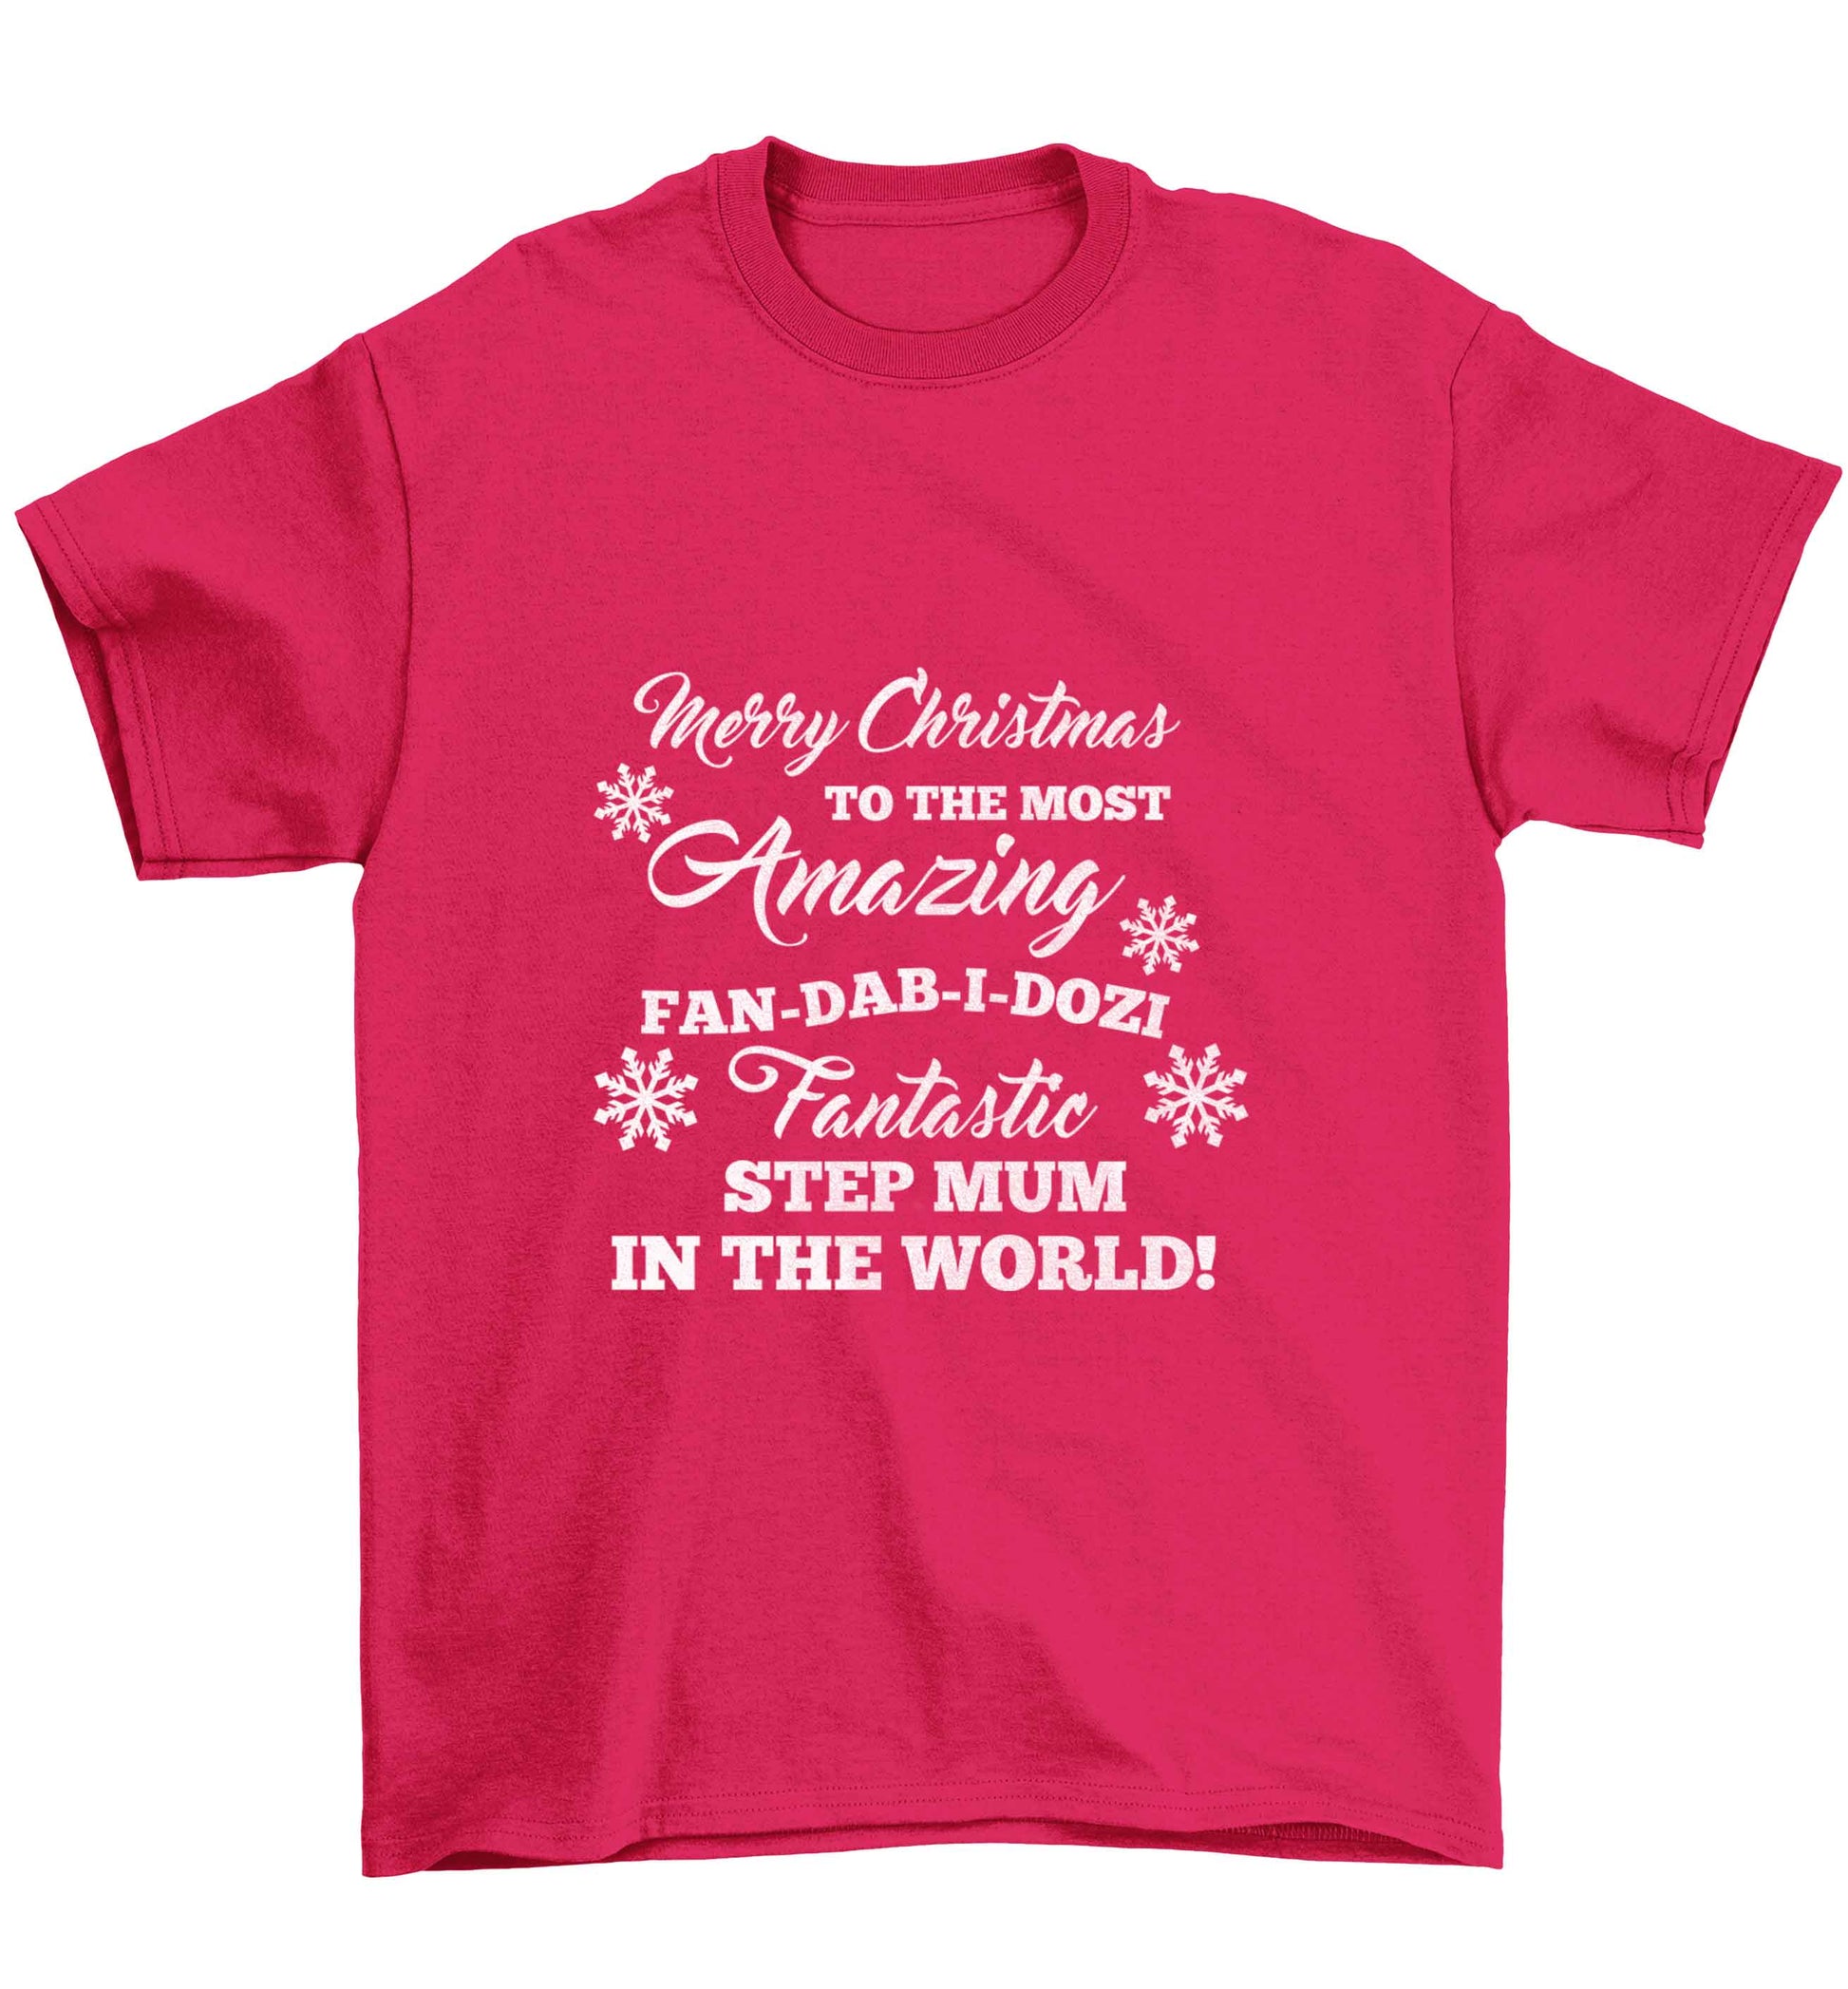 Merry Christmas to the most amazing fan-dab-i-dozi fantasic Step Mum in the world Children's pink Tshirt 12-13 Years